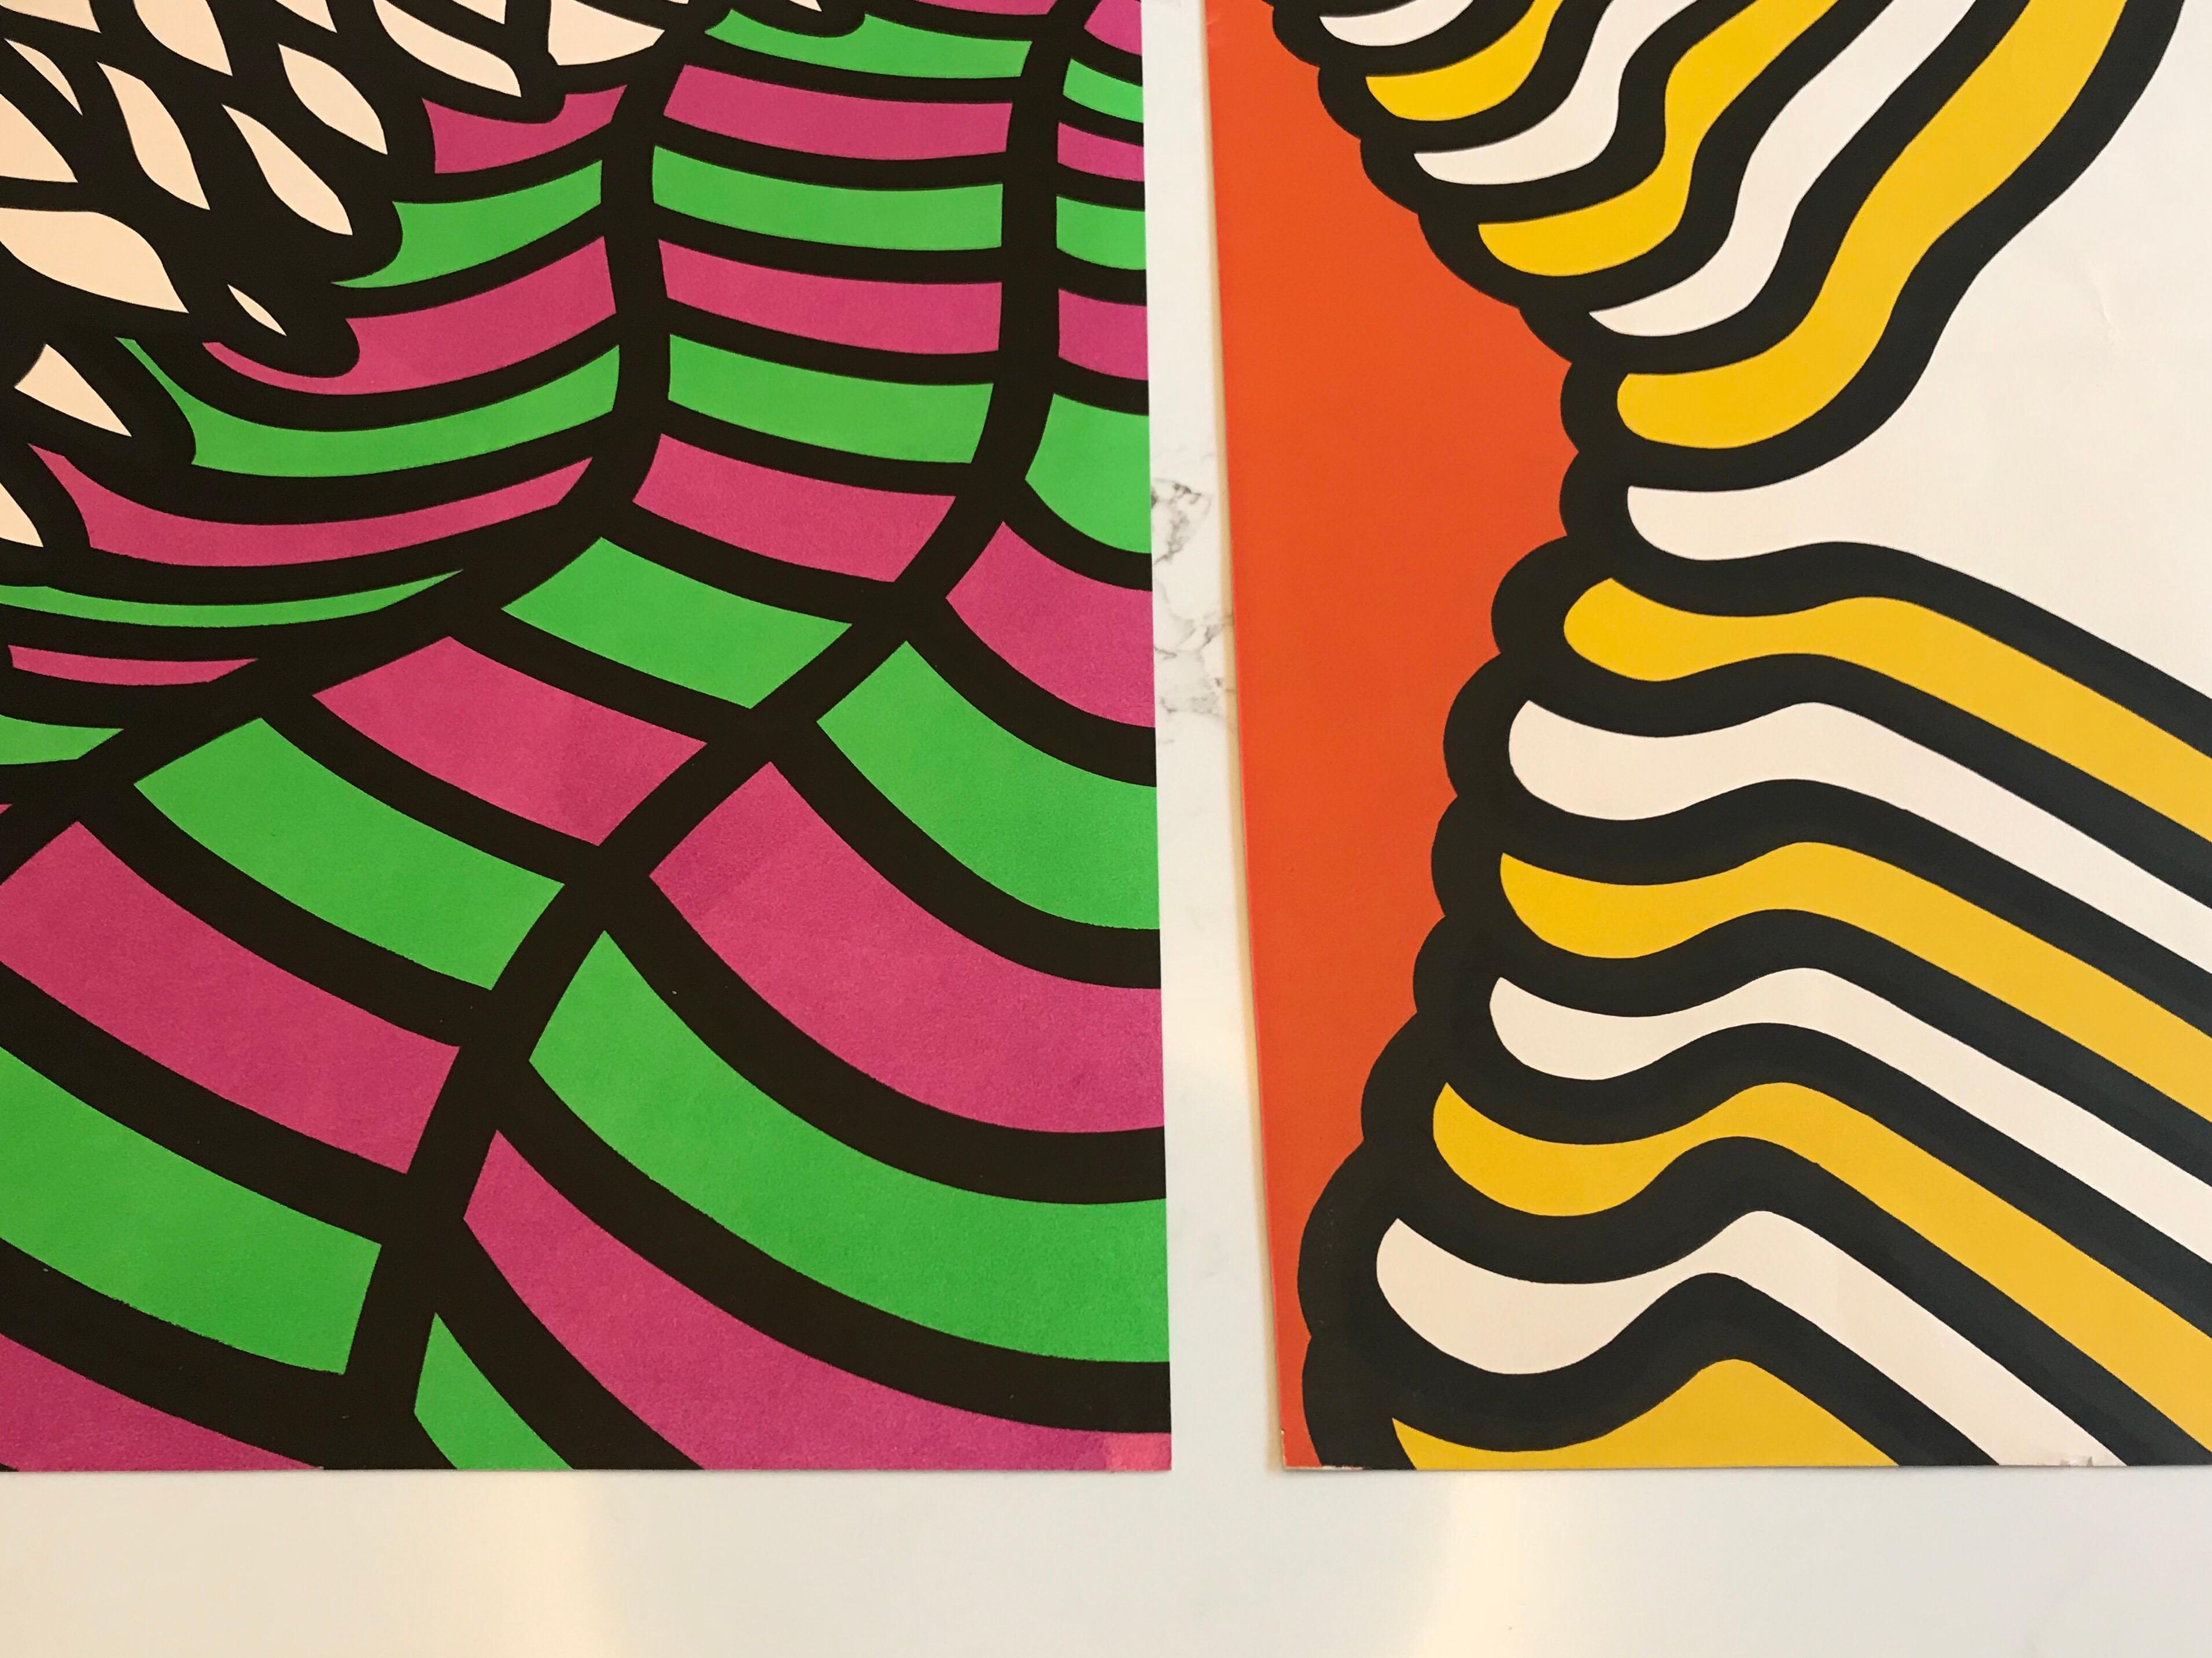 Painted Nicholas Krushenick Colored Lithographs, 1965